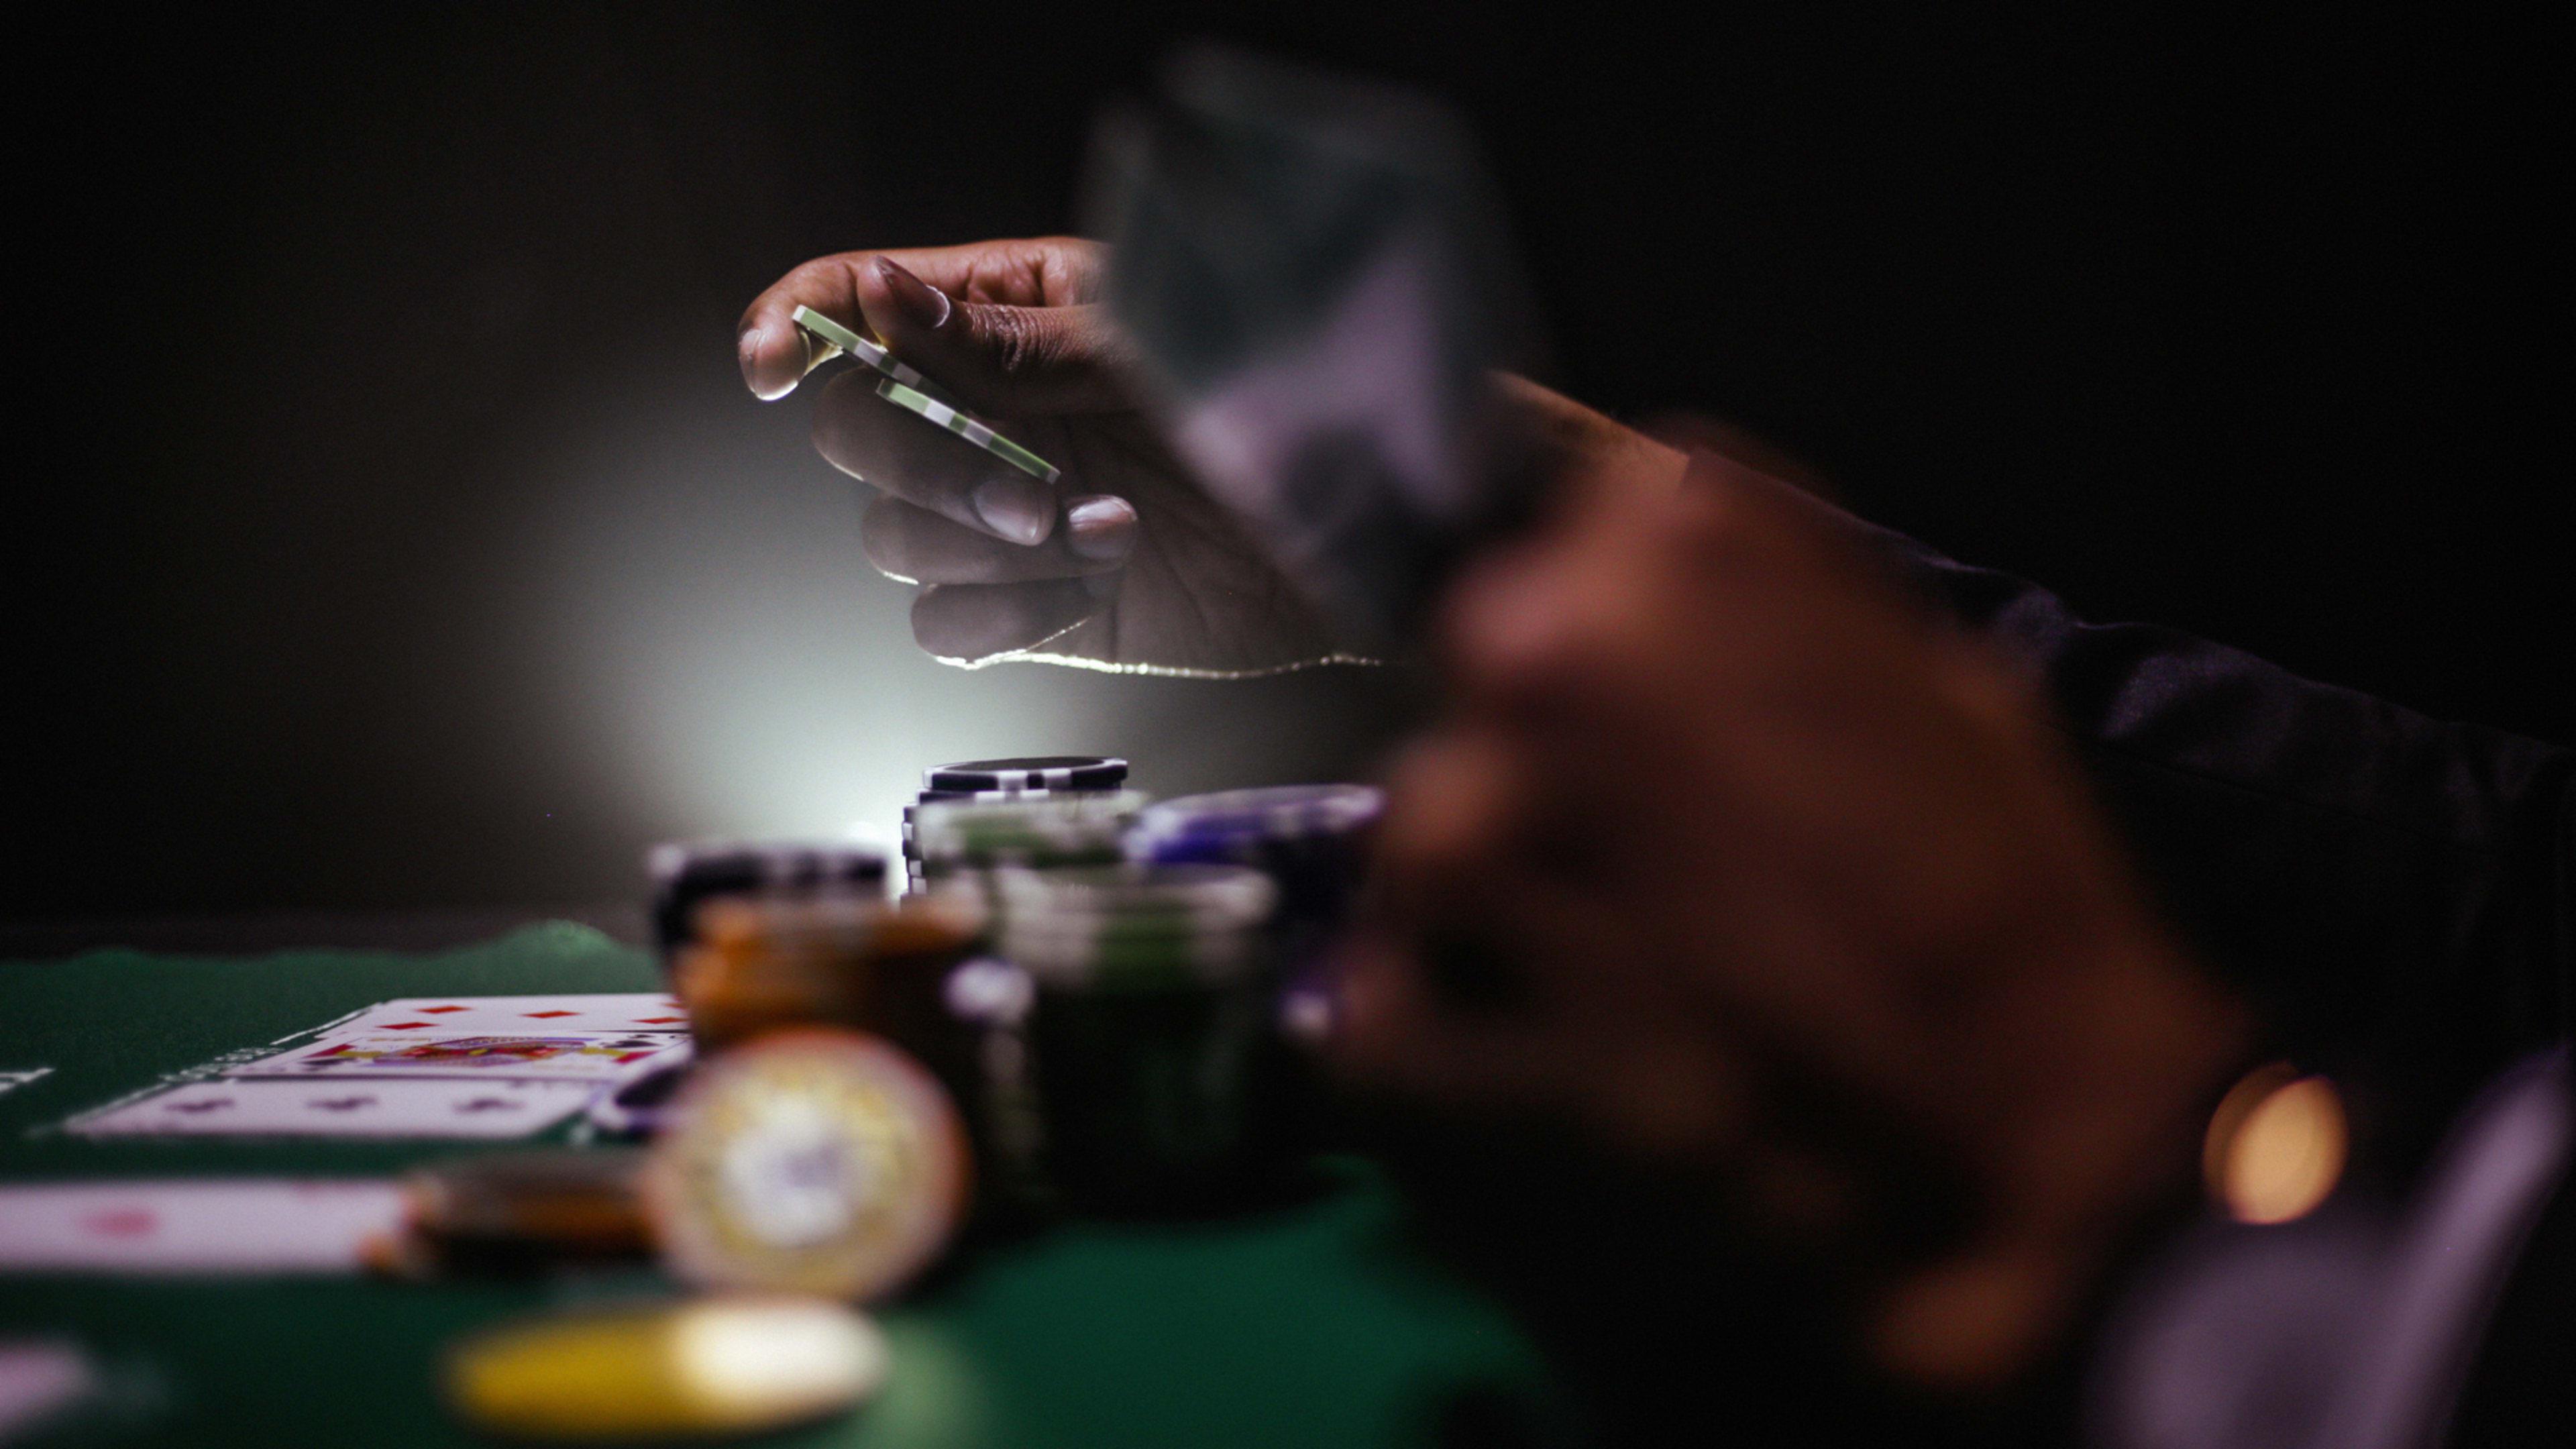 This Pro Poker Player Will Match Your Giving To 10 Effective-Altruism-Endorsed Charities